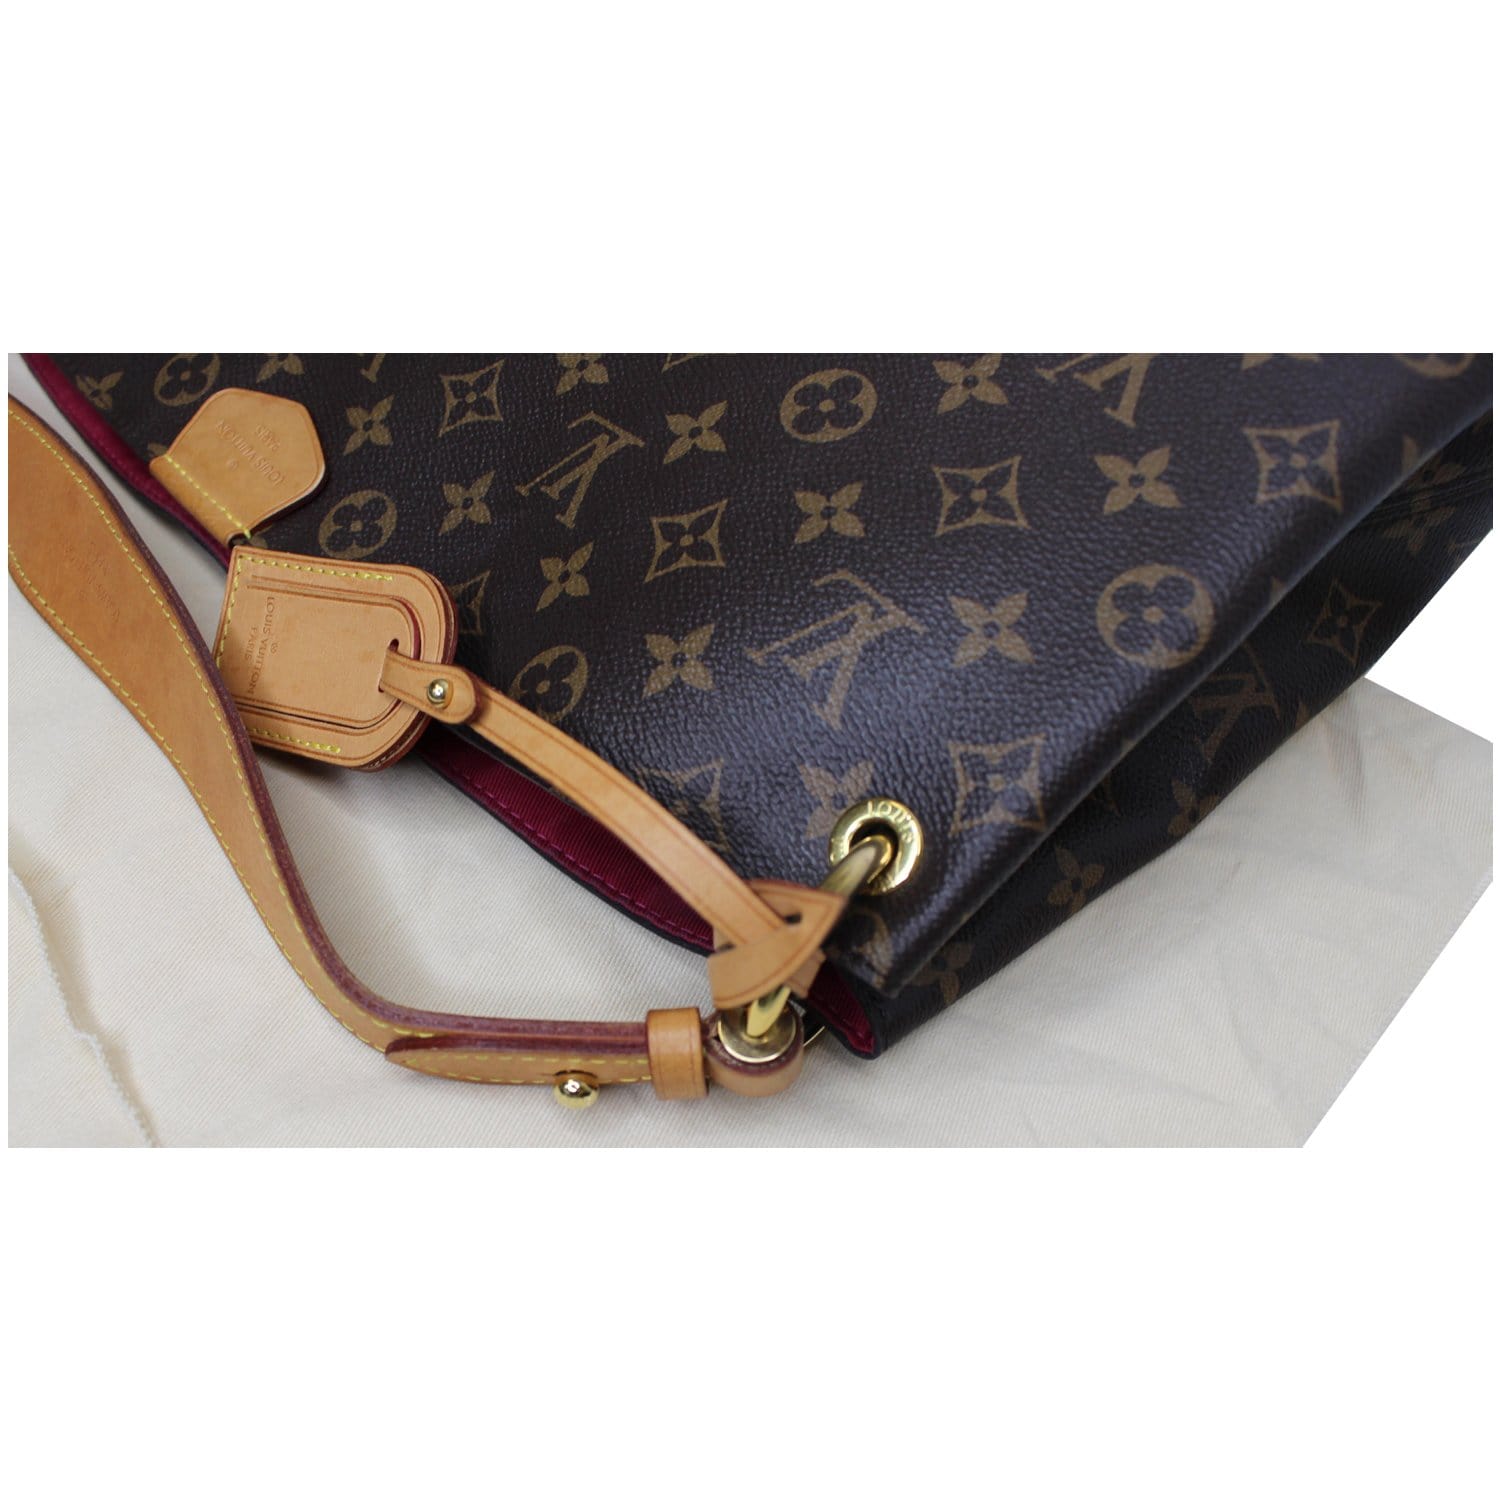 Graceful leather handbag Louis Vuitton Brown in Leather - 34206981